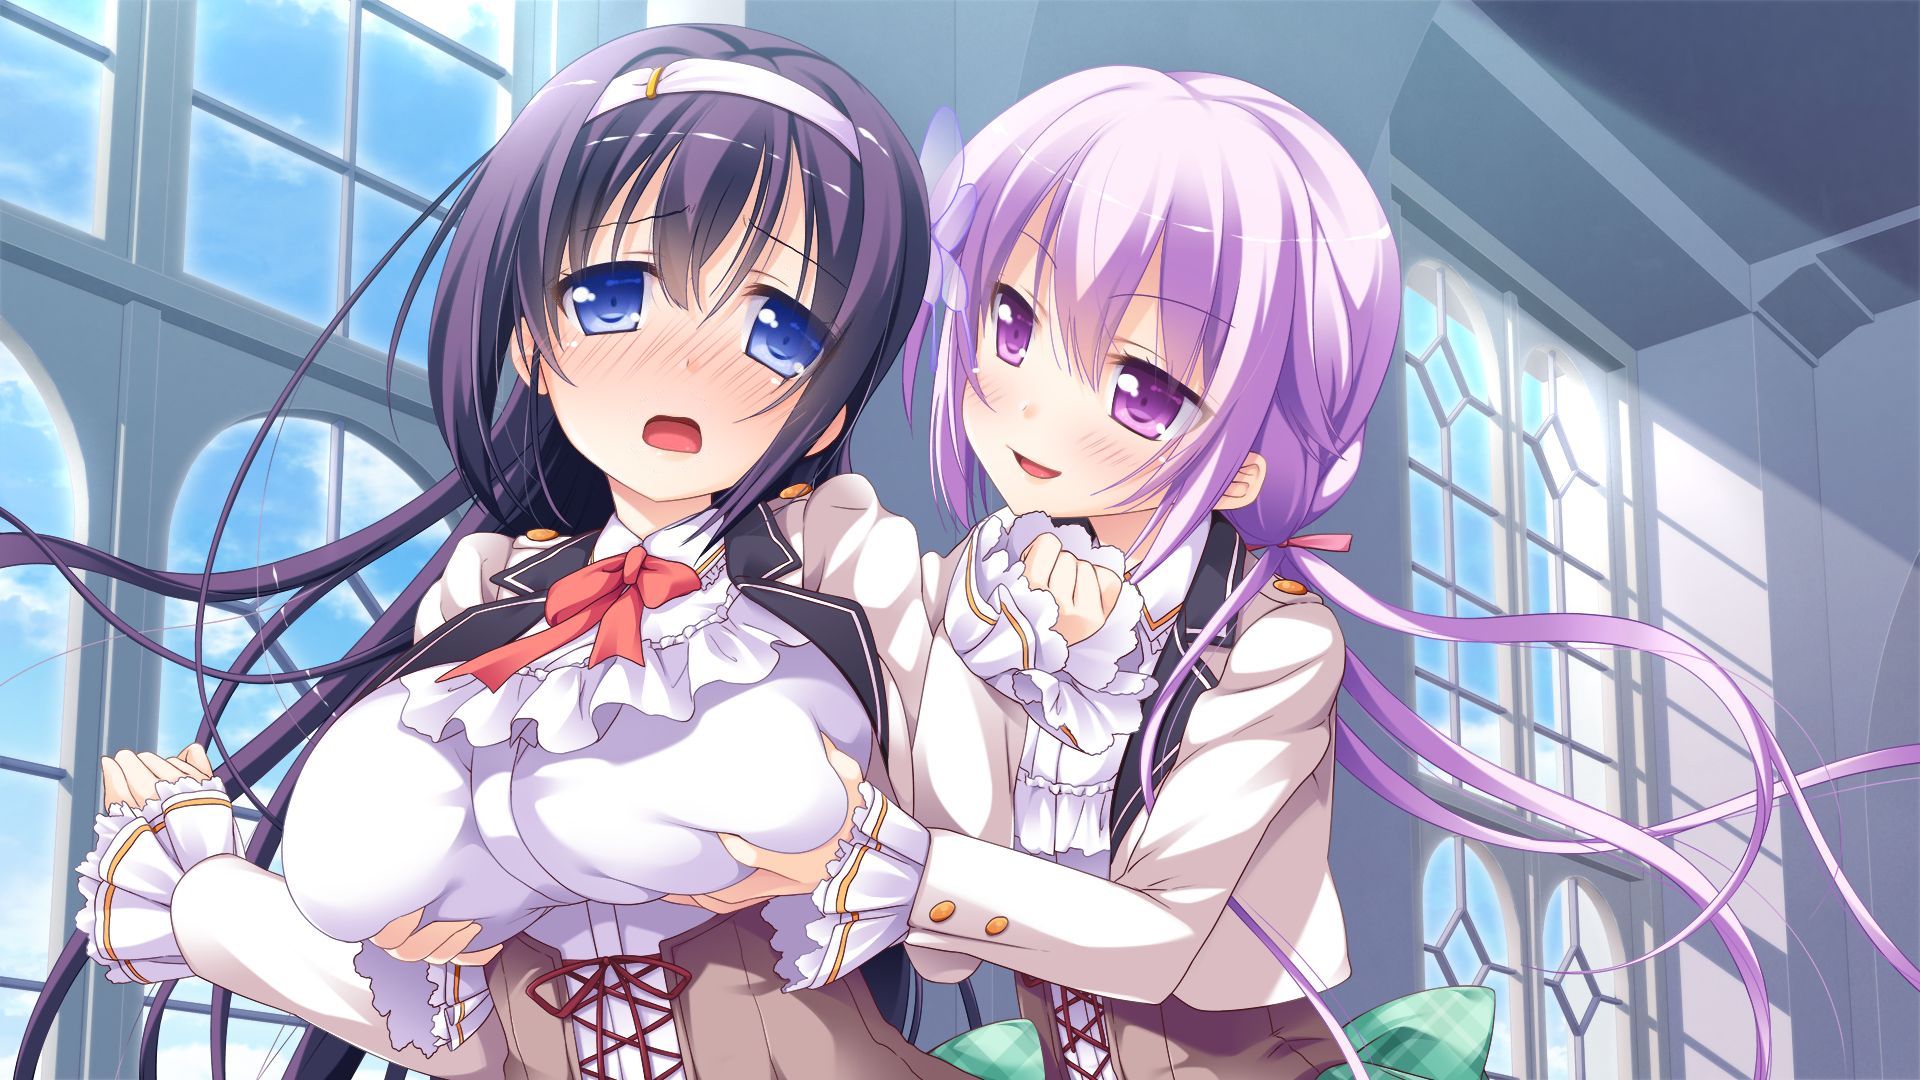 [Secondary-ZIP: Yuri lesbian image, or see other girls doing naughty things. 6